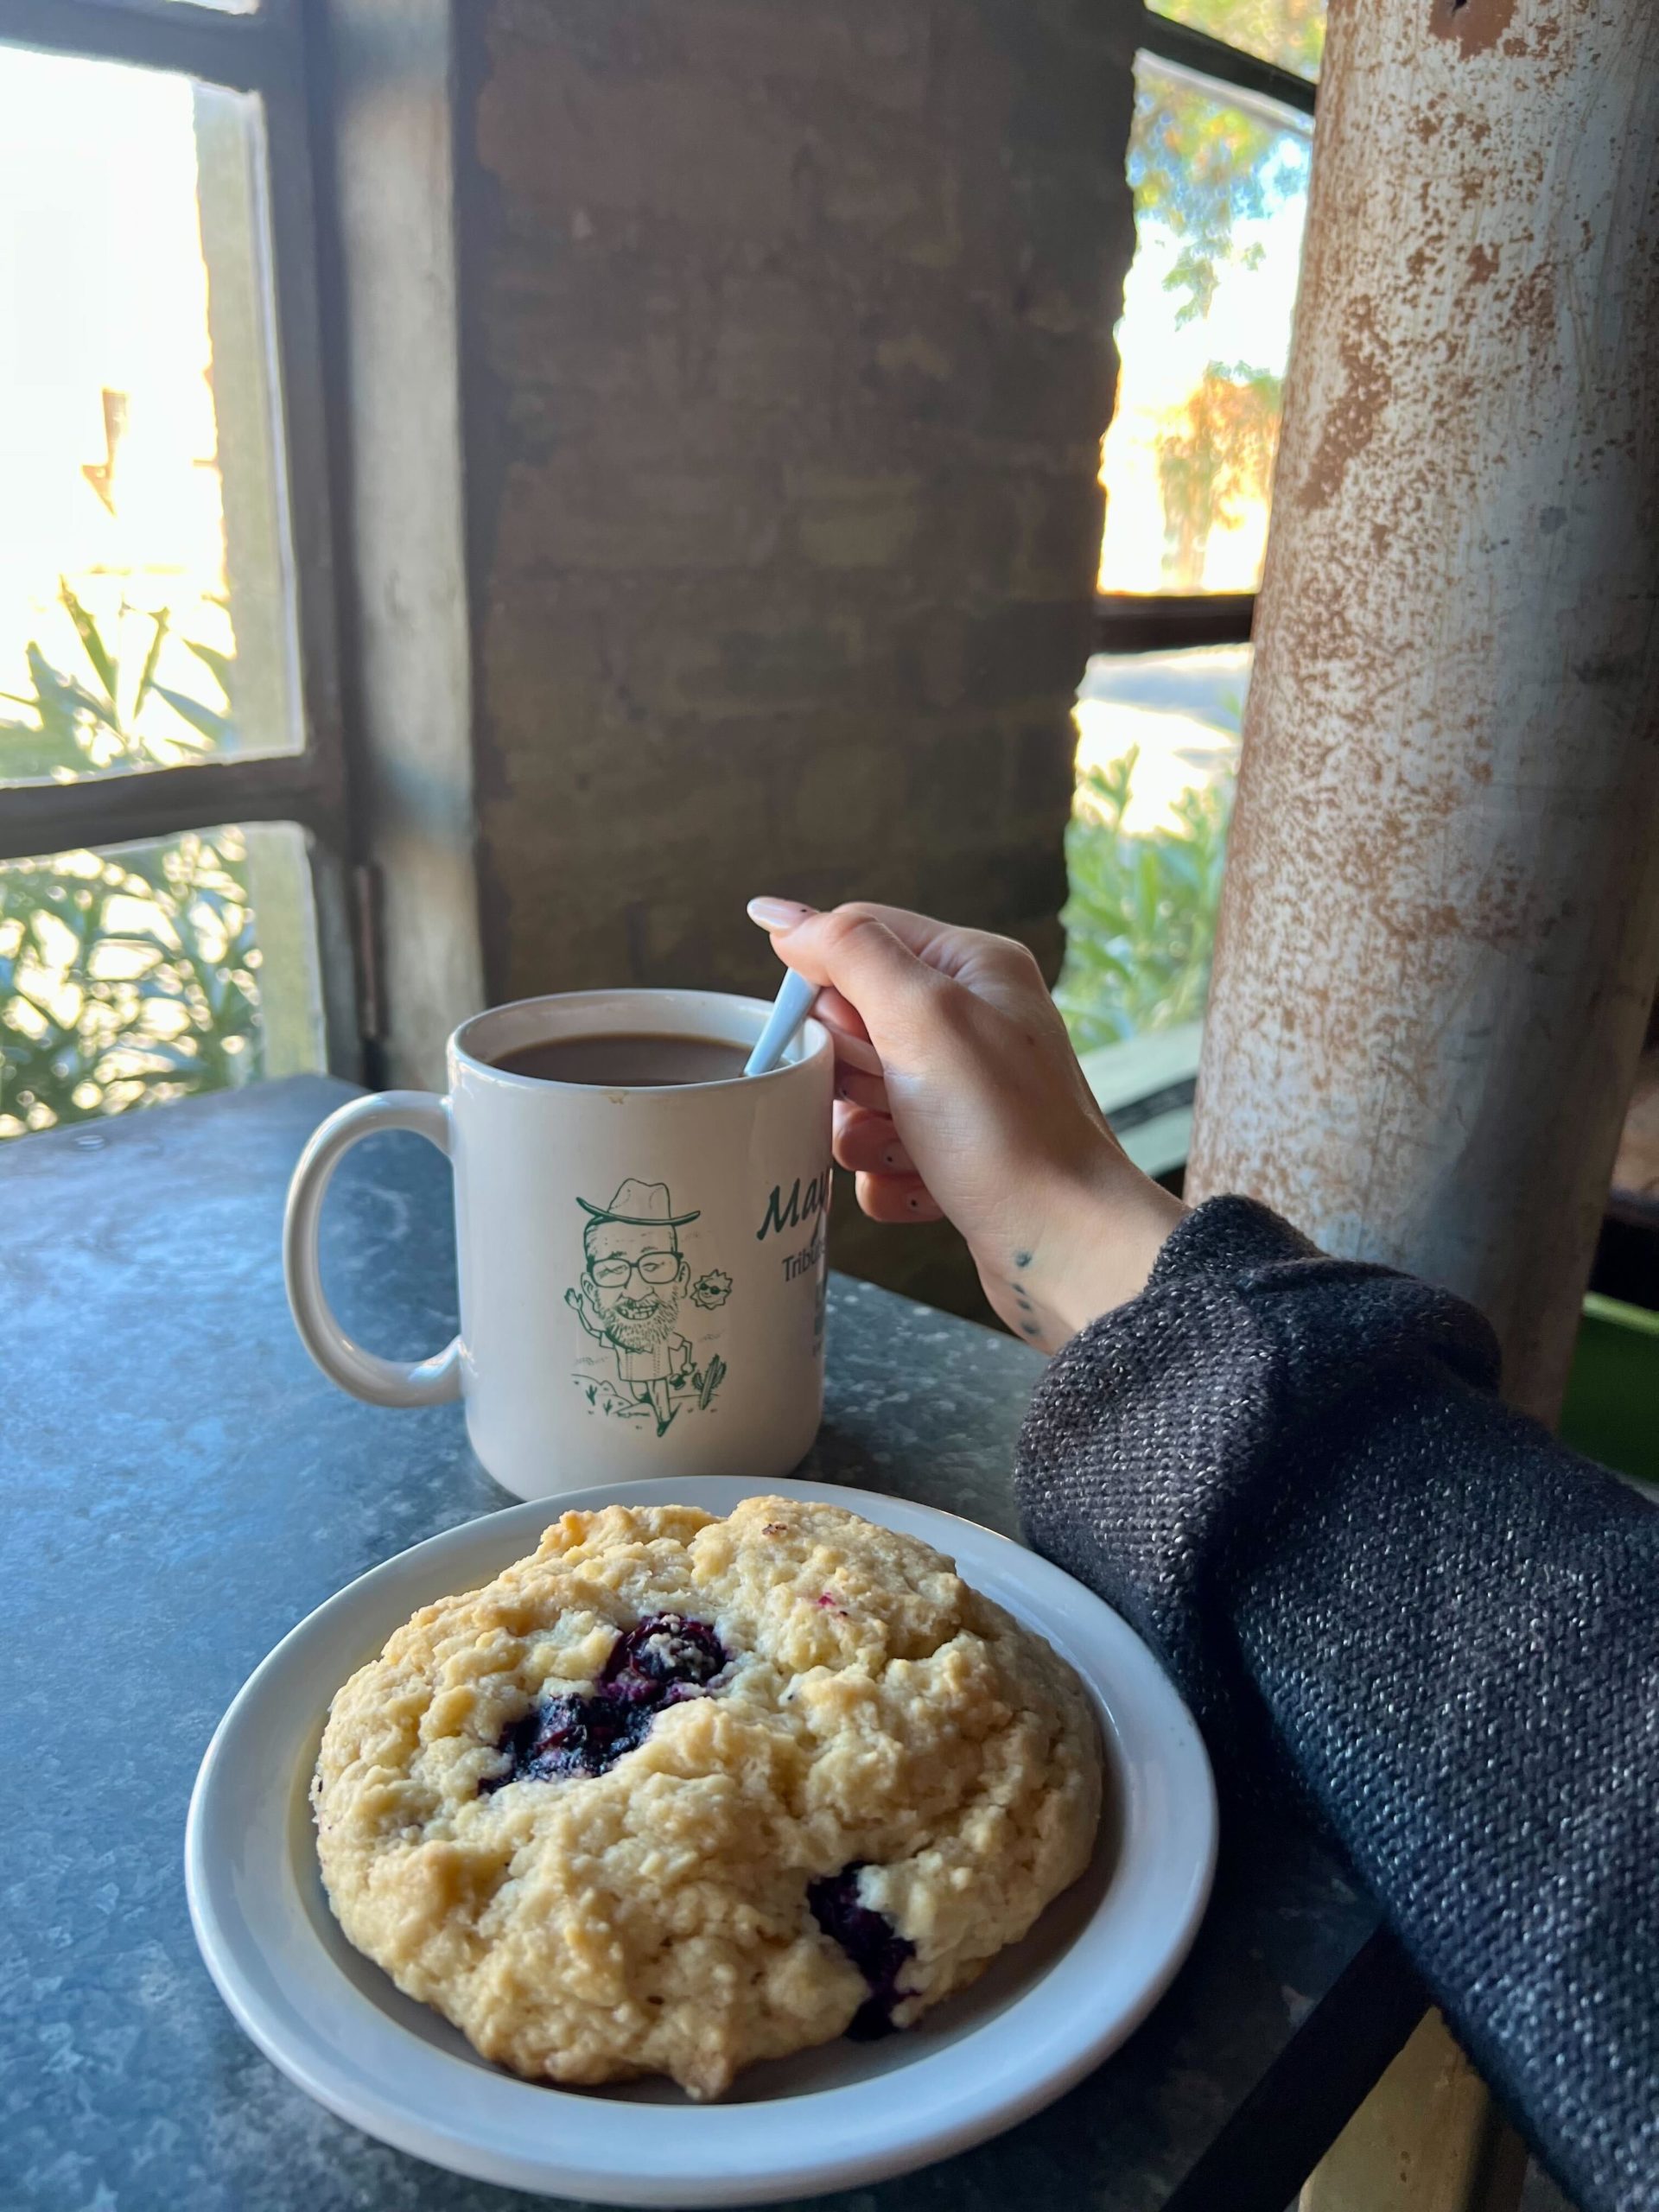 Blueberry scone at Tooley’s Cafe (Photo by Hannah Hernandez)